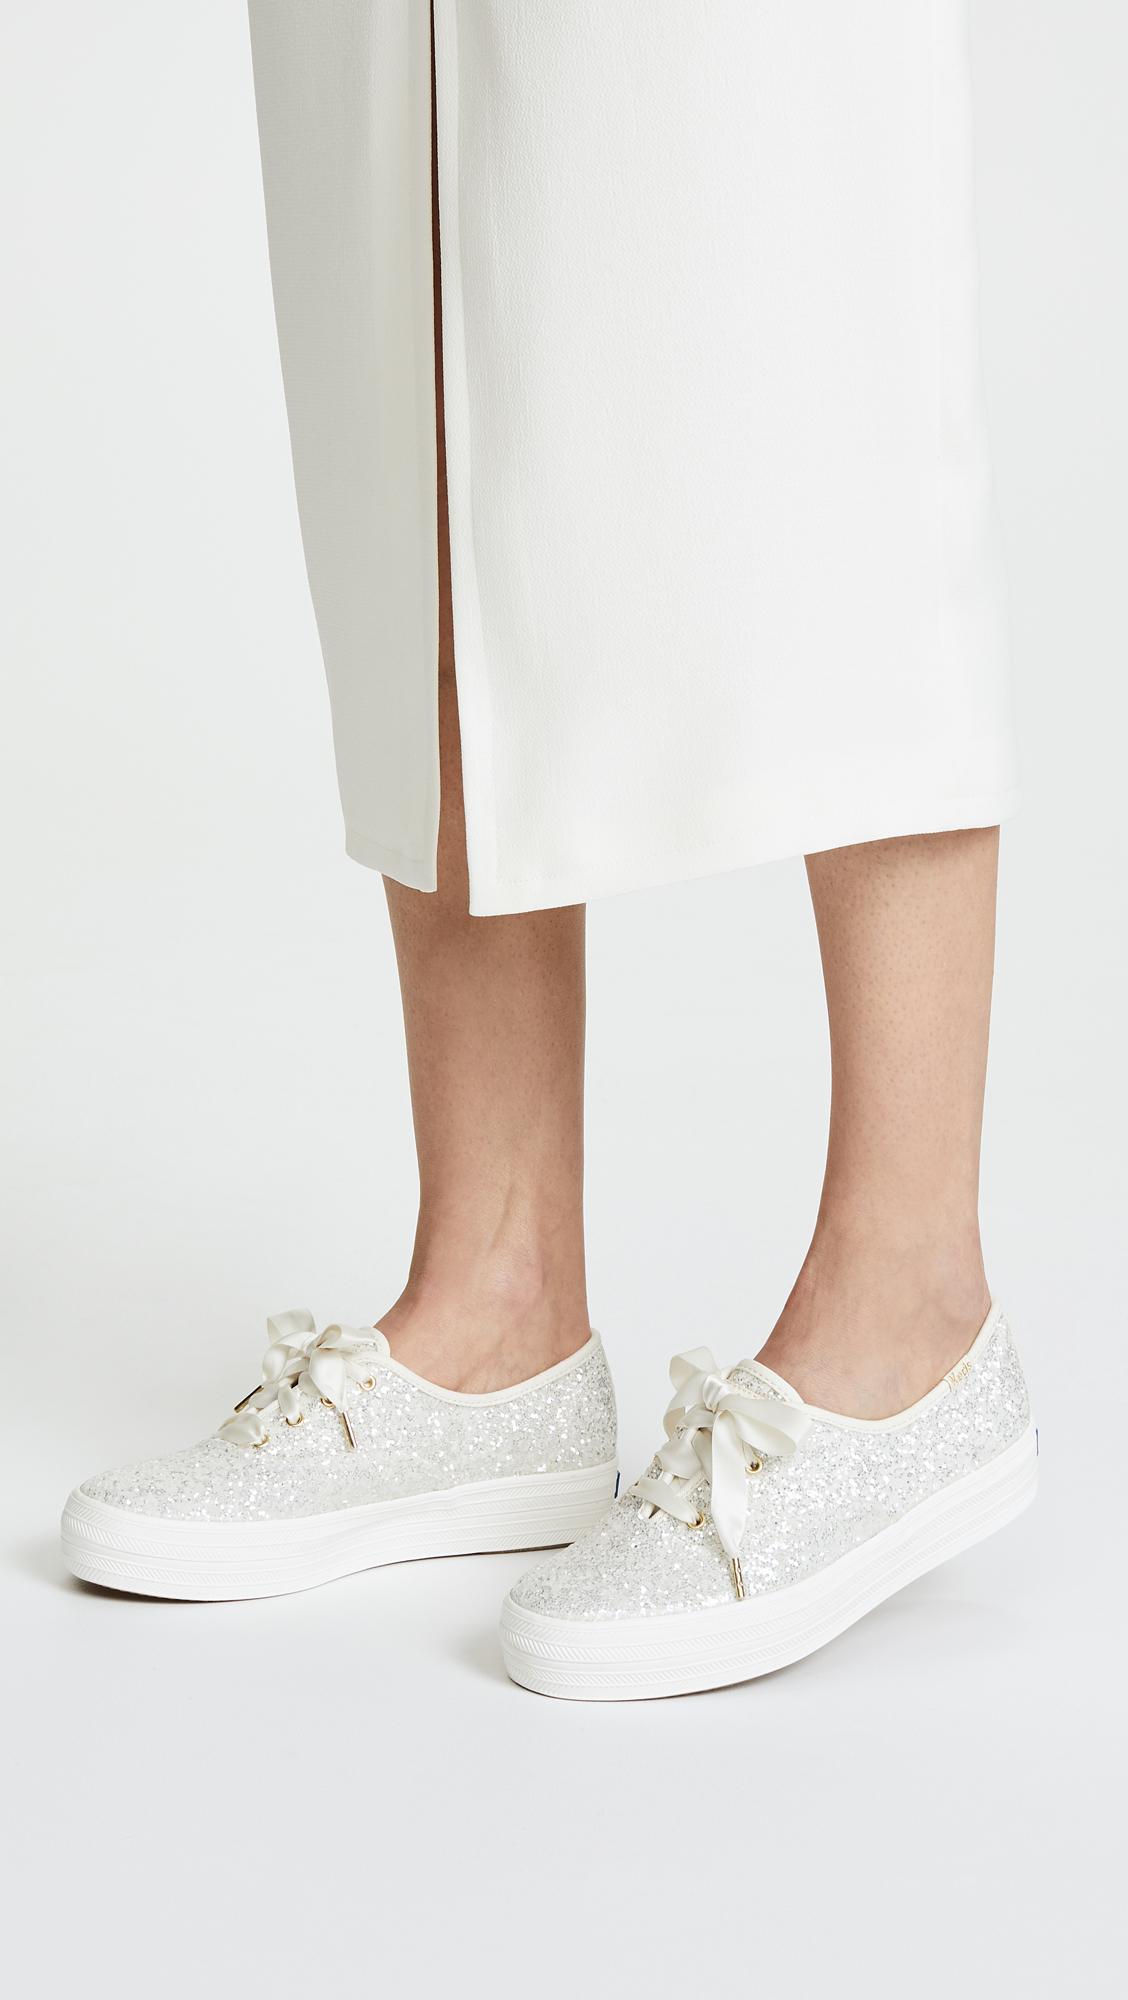 Keds X Kate Spade New York Triple Sneakers in White | Lyst